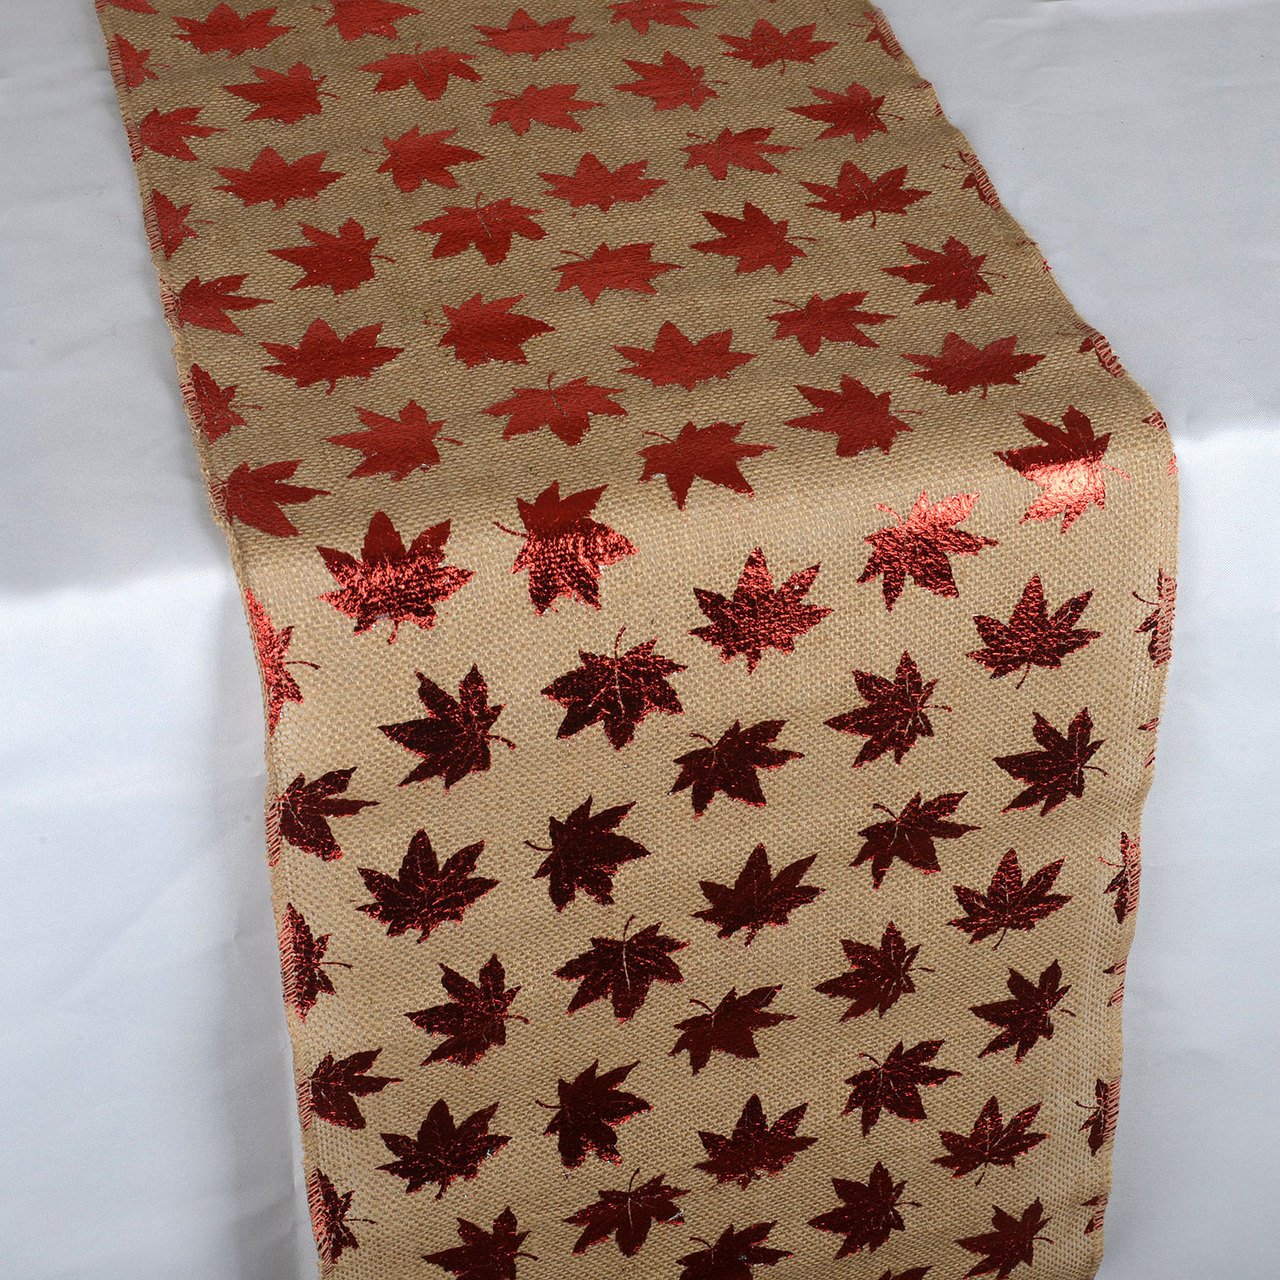 Leaf Natural - 100% Natural Jute Burlap Table Runner ( 14 inch x 108 inches )